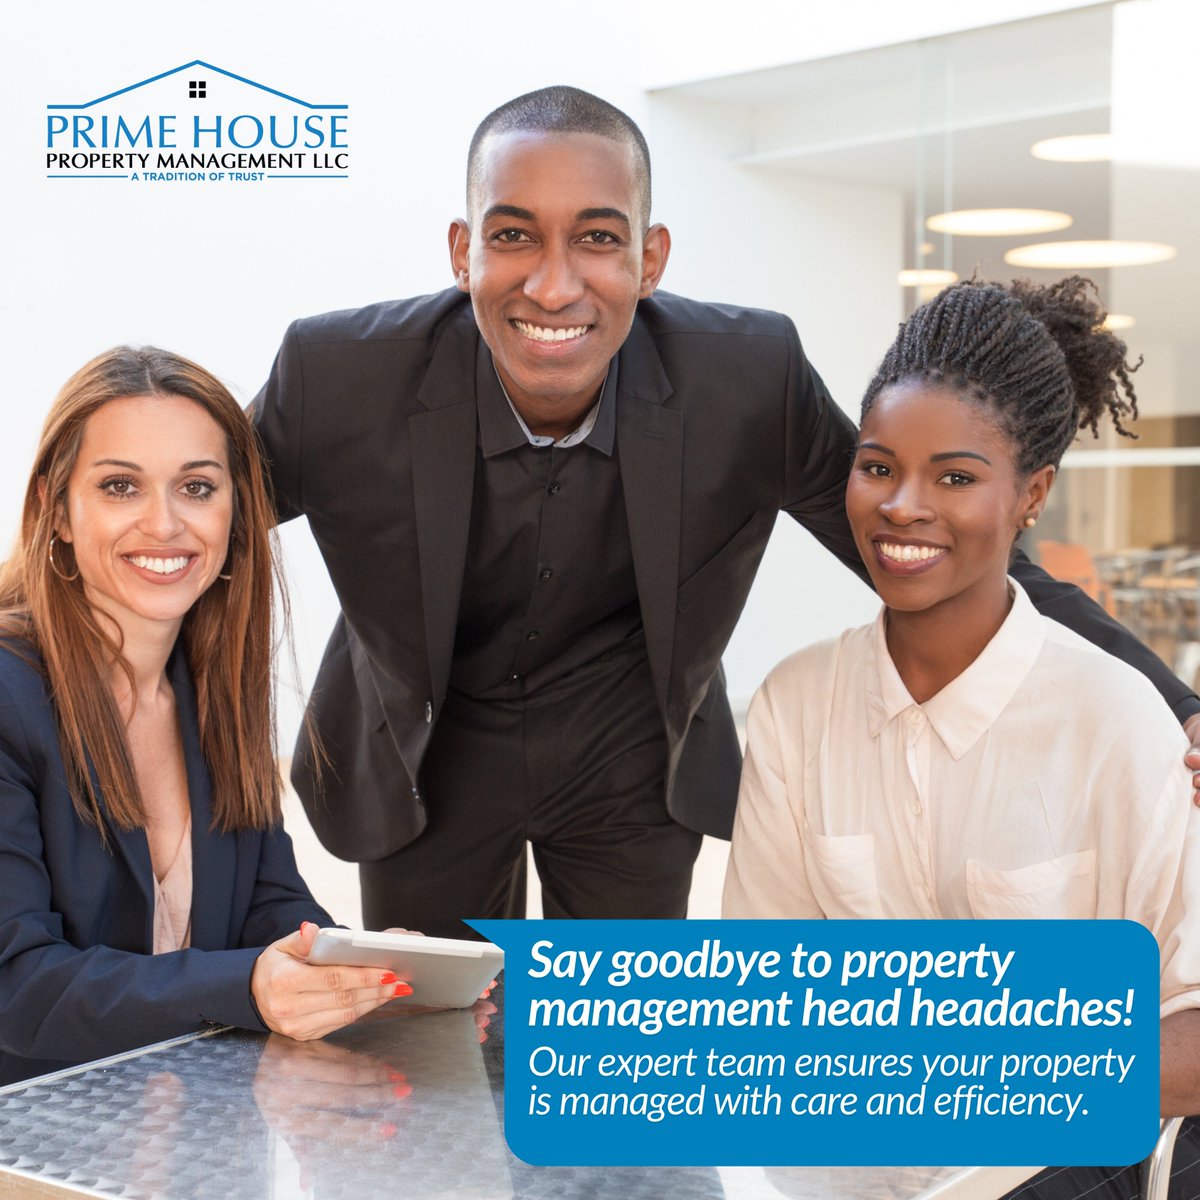 Our expert team ensures your property is managed with care and efficiency. Please sit back, relax, and let us take care of the rest. 
.
Contact us today!
----
🌐 primehouseproperties.com
.
#PropertyManagement #RealEstateManagement #PropertyPortfolio #RentalManagement